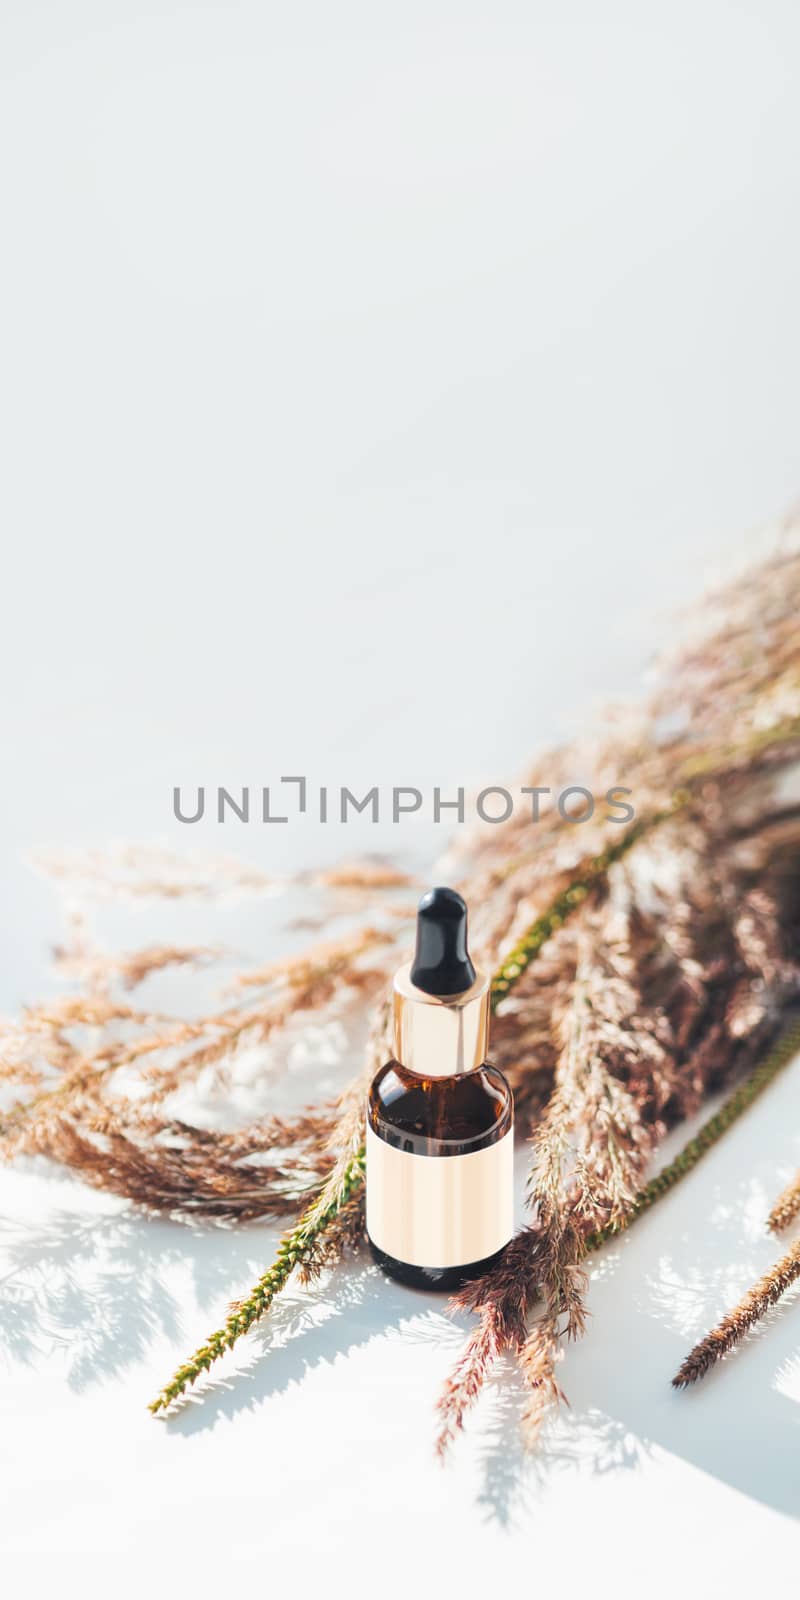 Concept of apothecary cosmetic. Herbs and brown glass bottle of essential oil in still life composition on light blue and white background. Sunlight and shadow. Natural cosmetic remedy with white tag.